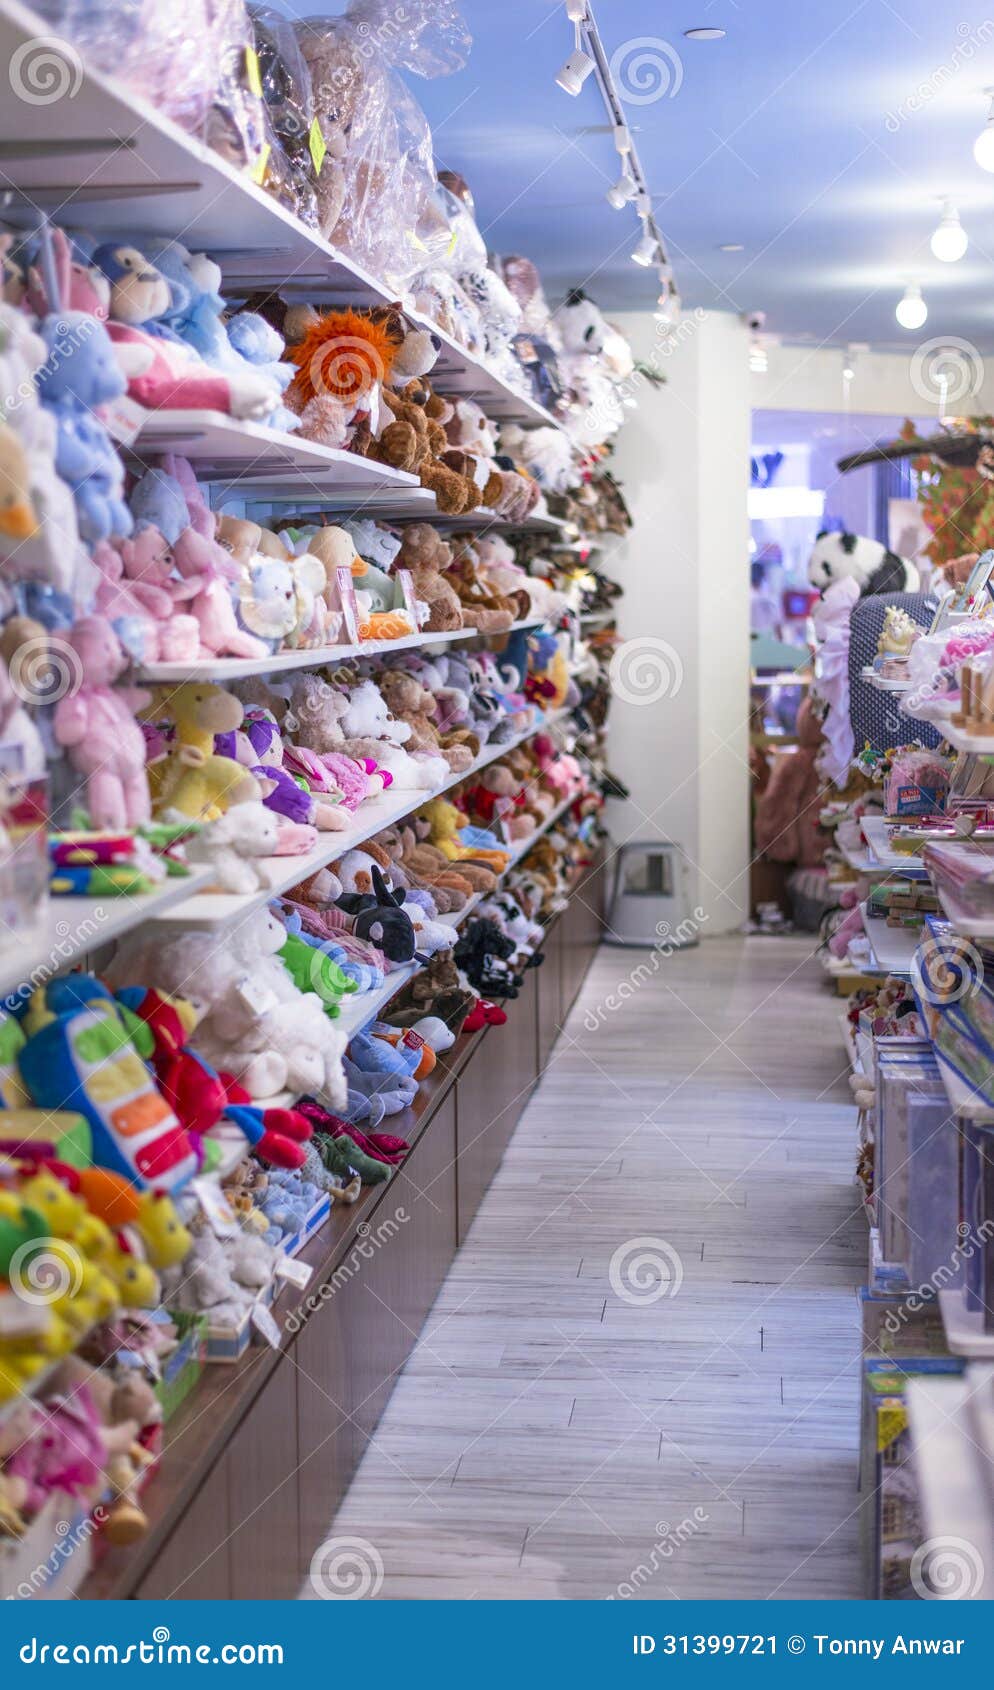 toy store display variety stuffed soft inside photo was taken june 31399721